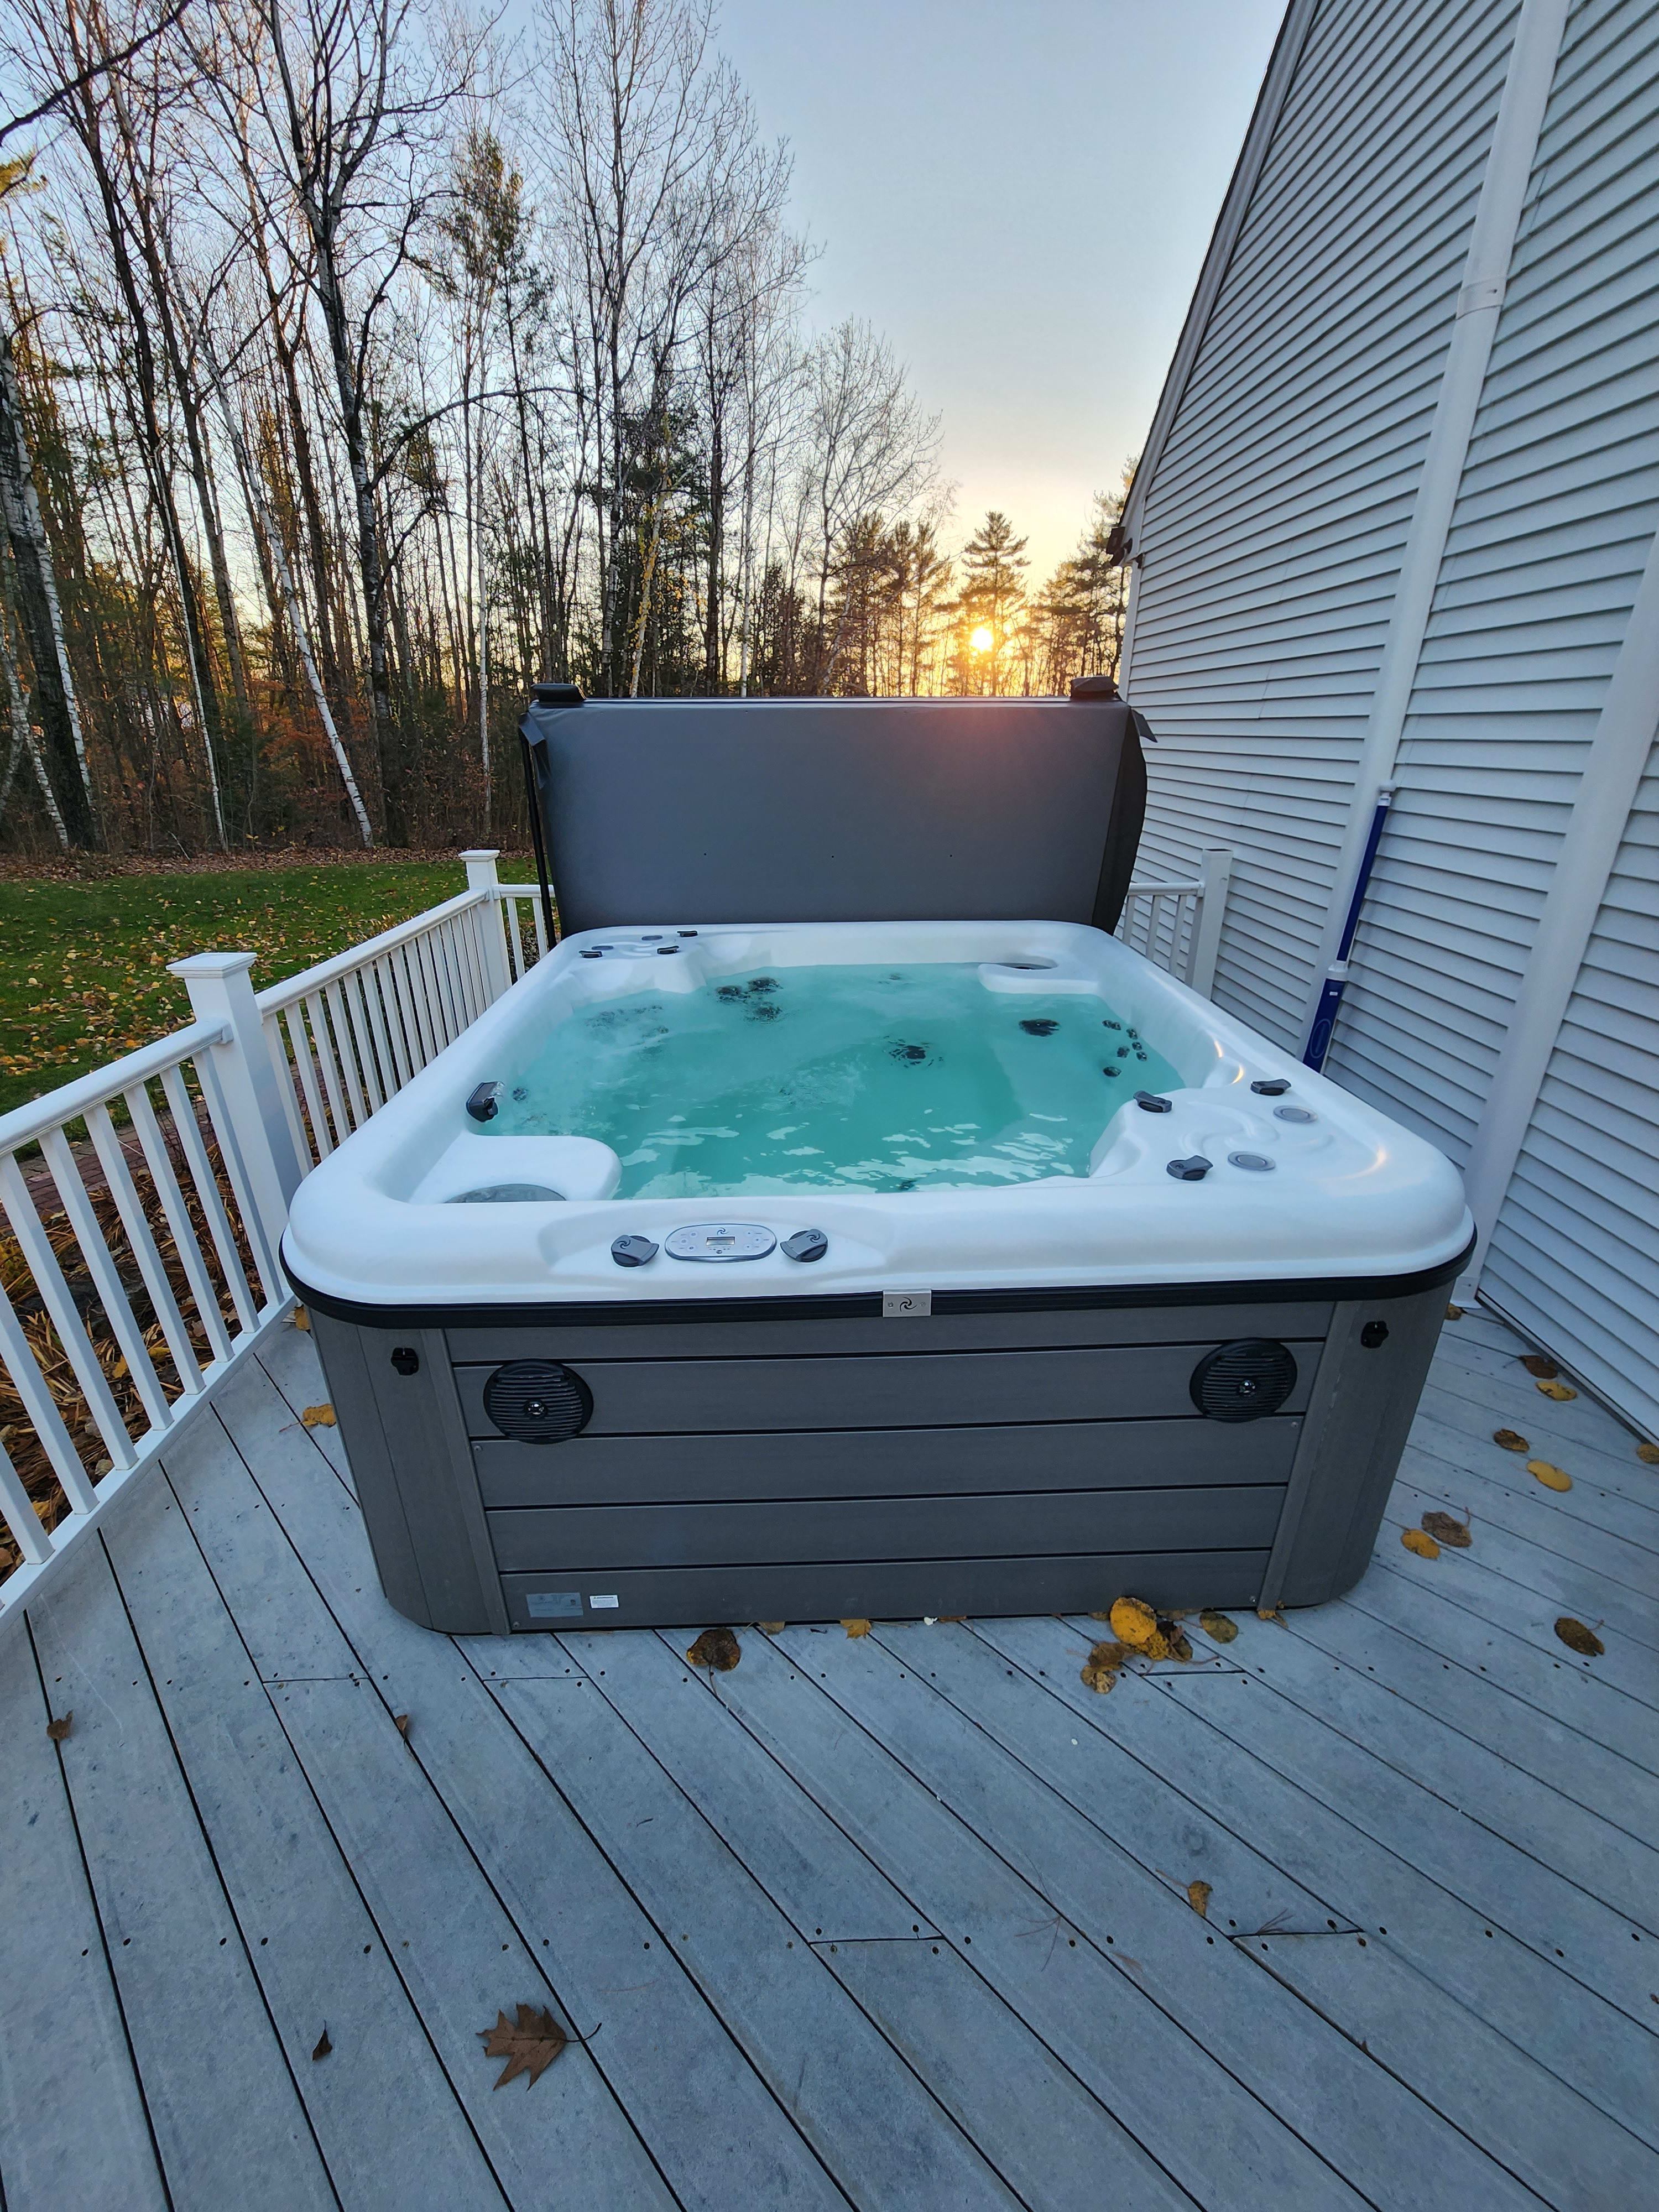 Relax in the 6 seater hot tub. We keep it well maintained and ready for your stay.